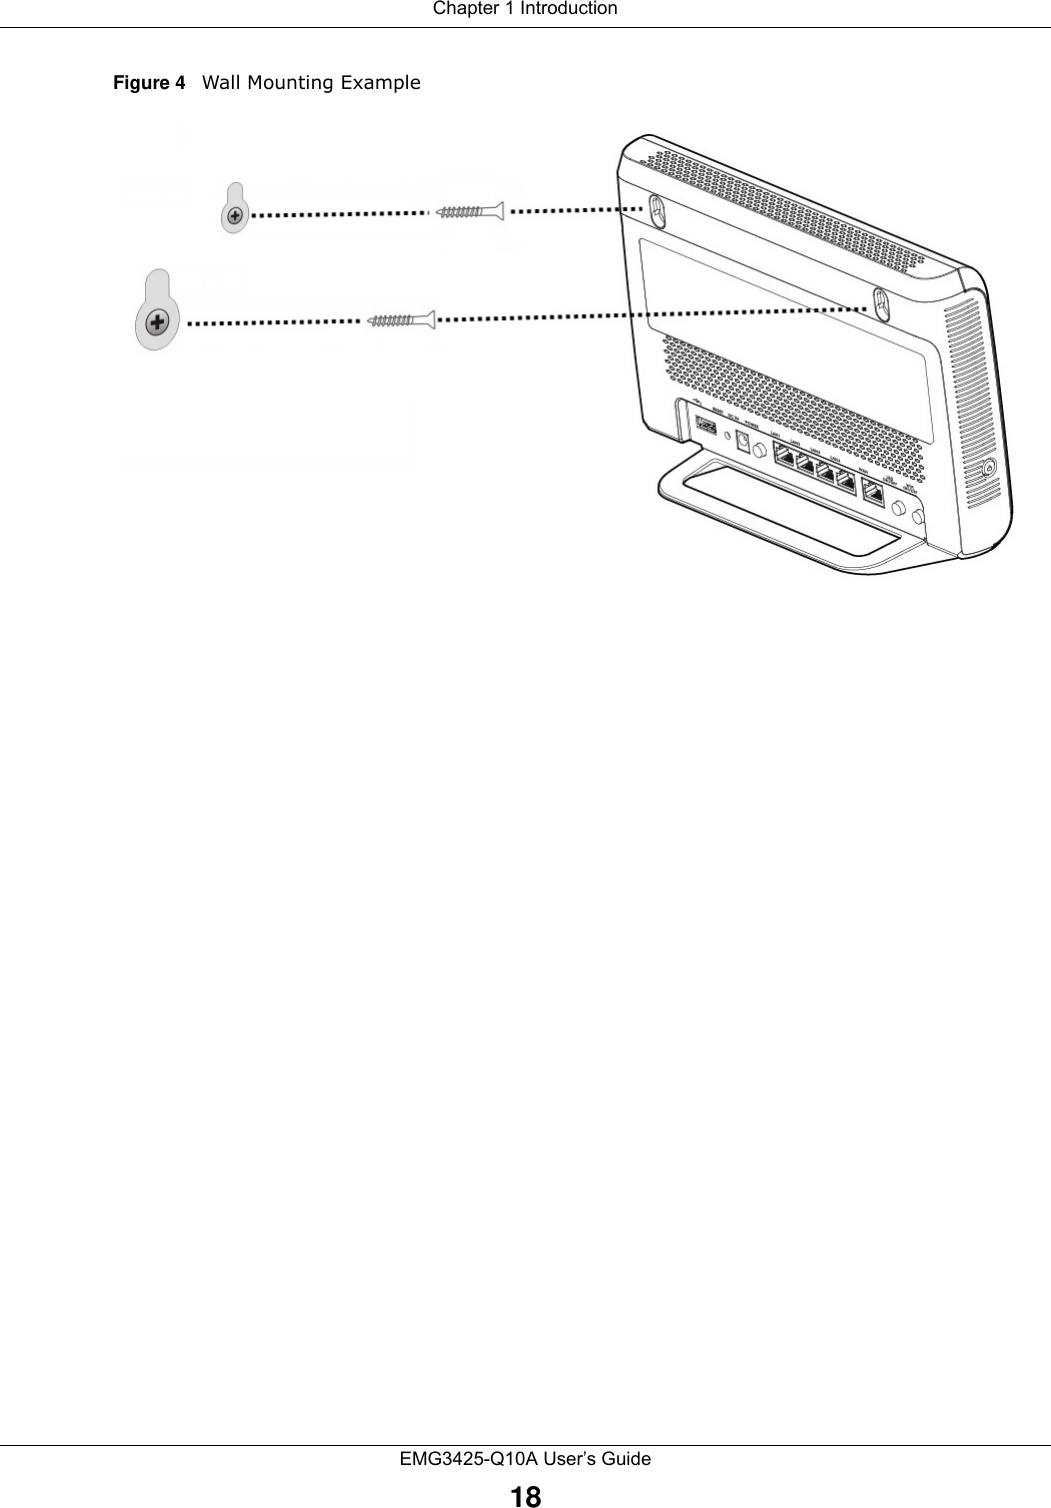 Chapter 1 IntroductionEMG3425-Q10A User’s Guide18Figure 4   Wall Mounting Example